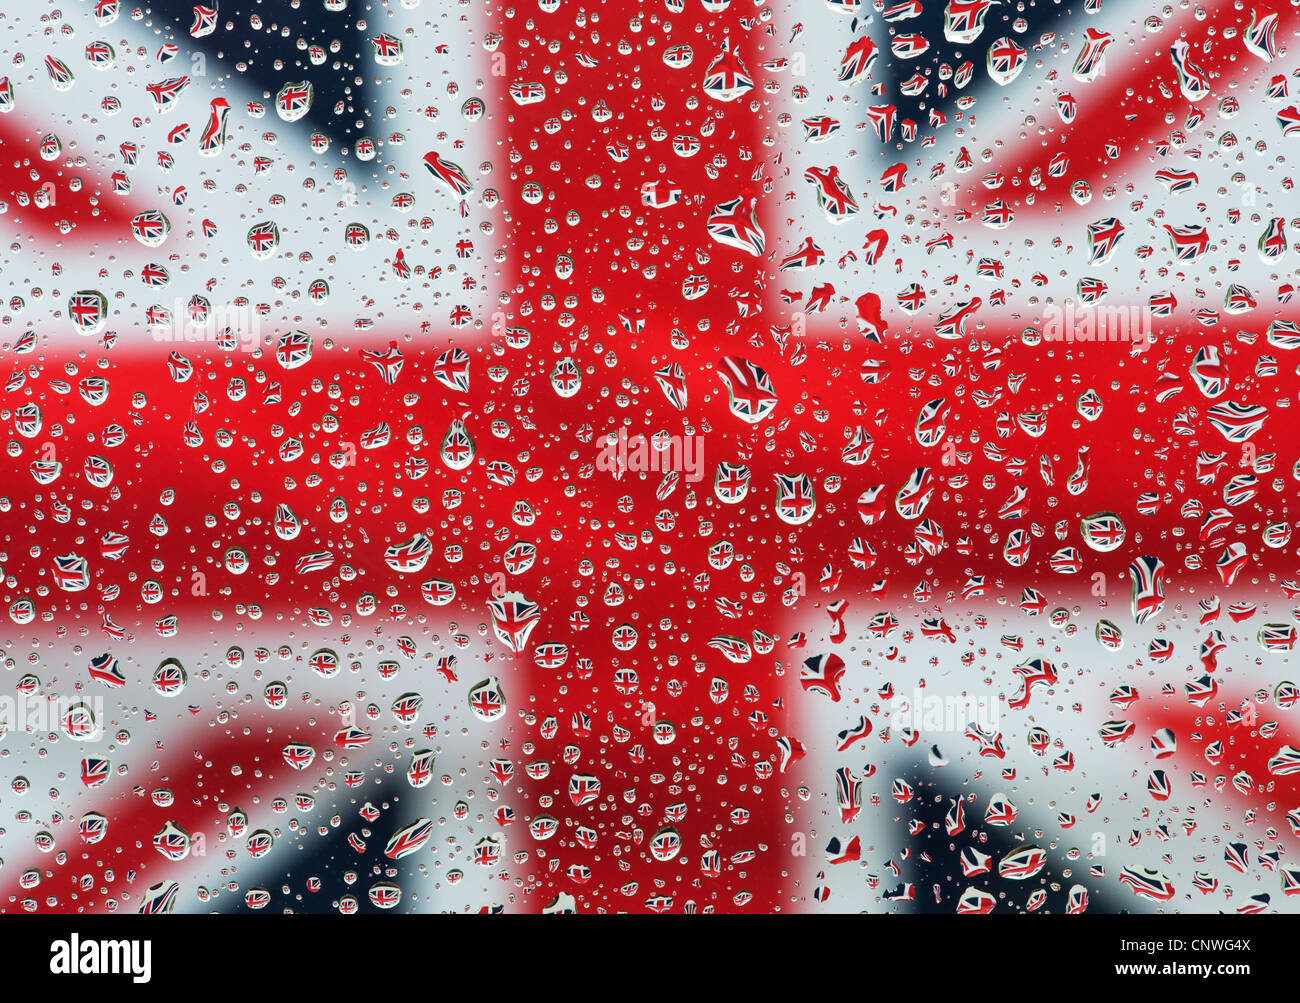 Raindrops on glass in front of a Union jack flag Stock Photo